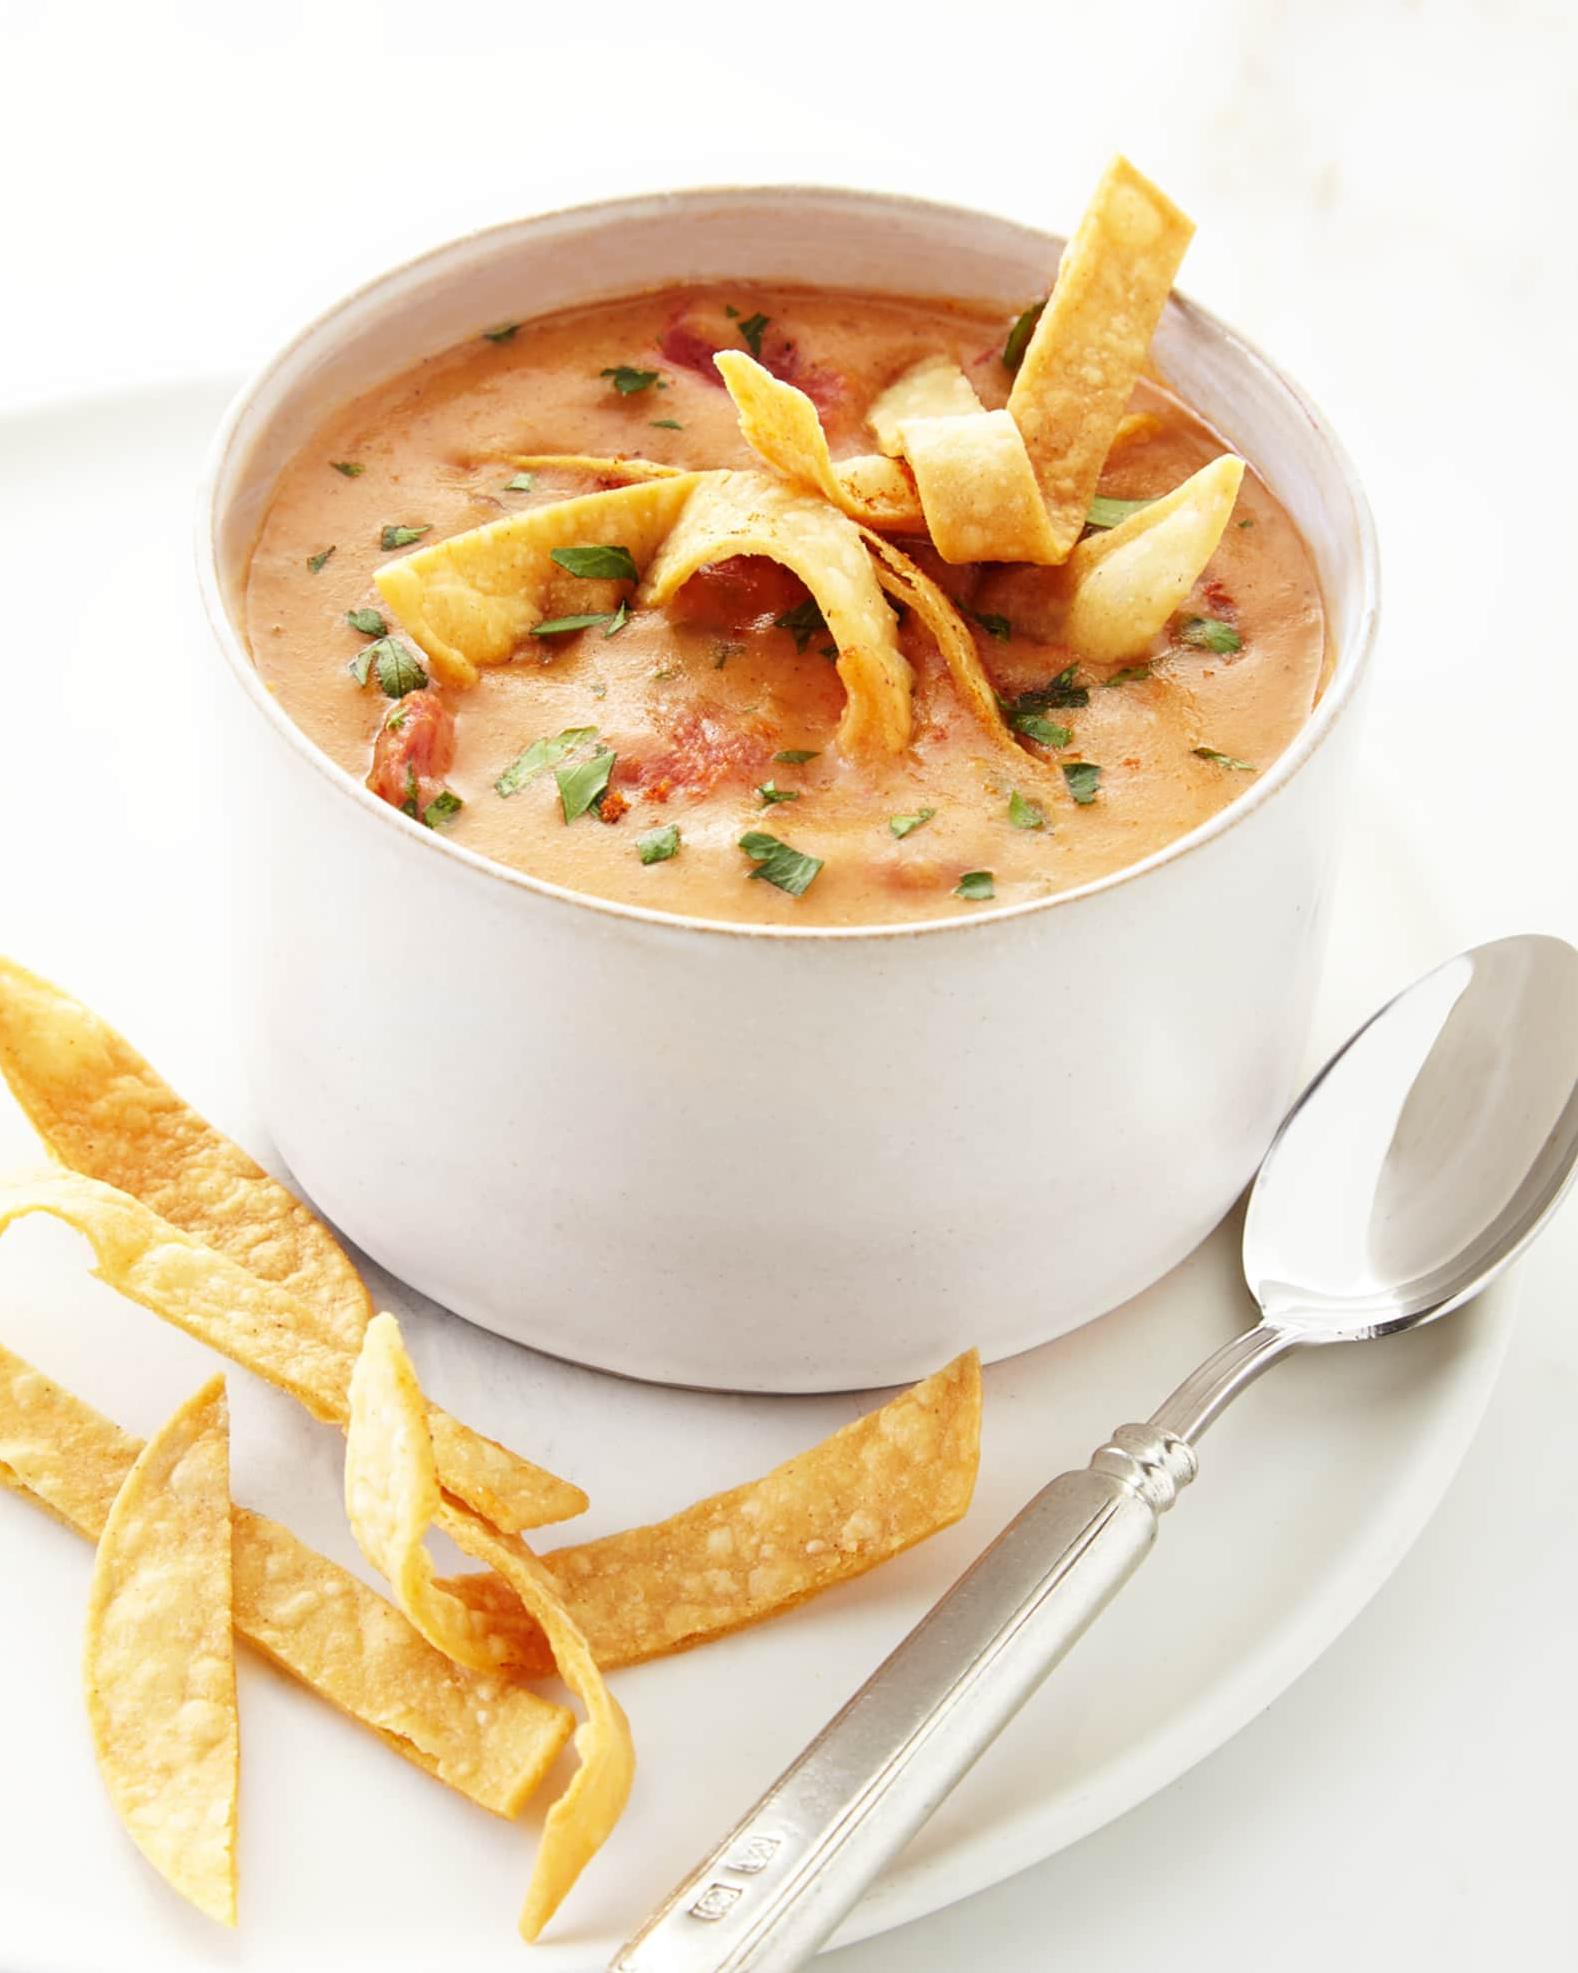  The crunchy tortilla strips are the perfect contrast to the warm and creamy soup.